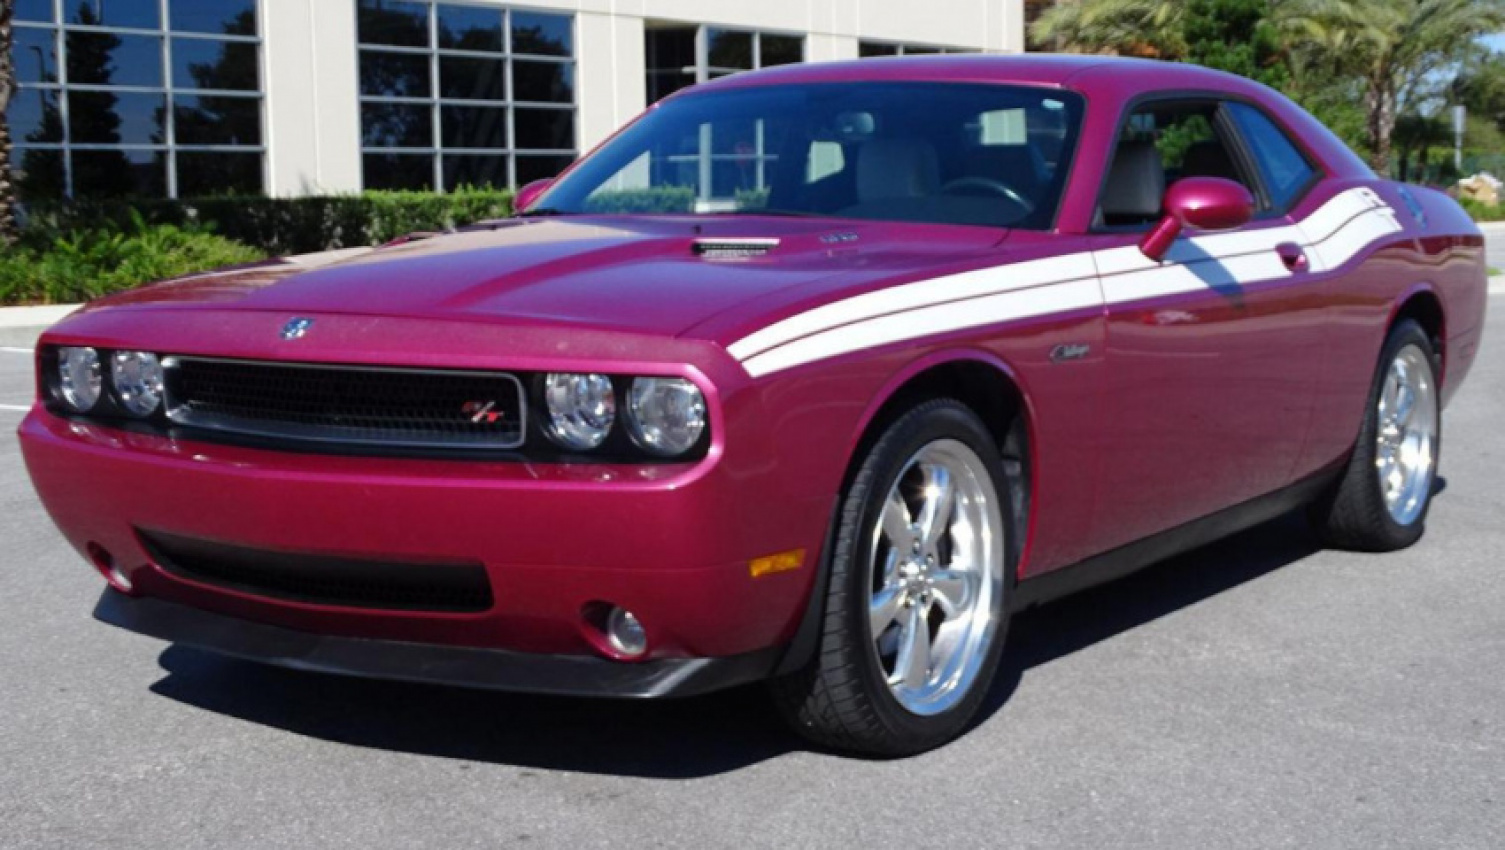 autos, cars, classic cars, dodge, 3rd generation challenger guides, vnex, 2010 dodge challenger guide: specs, performance & more